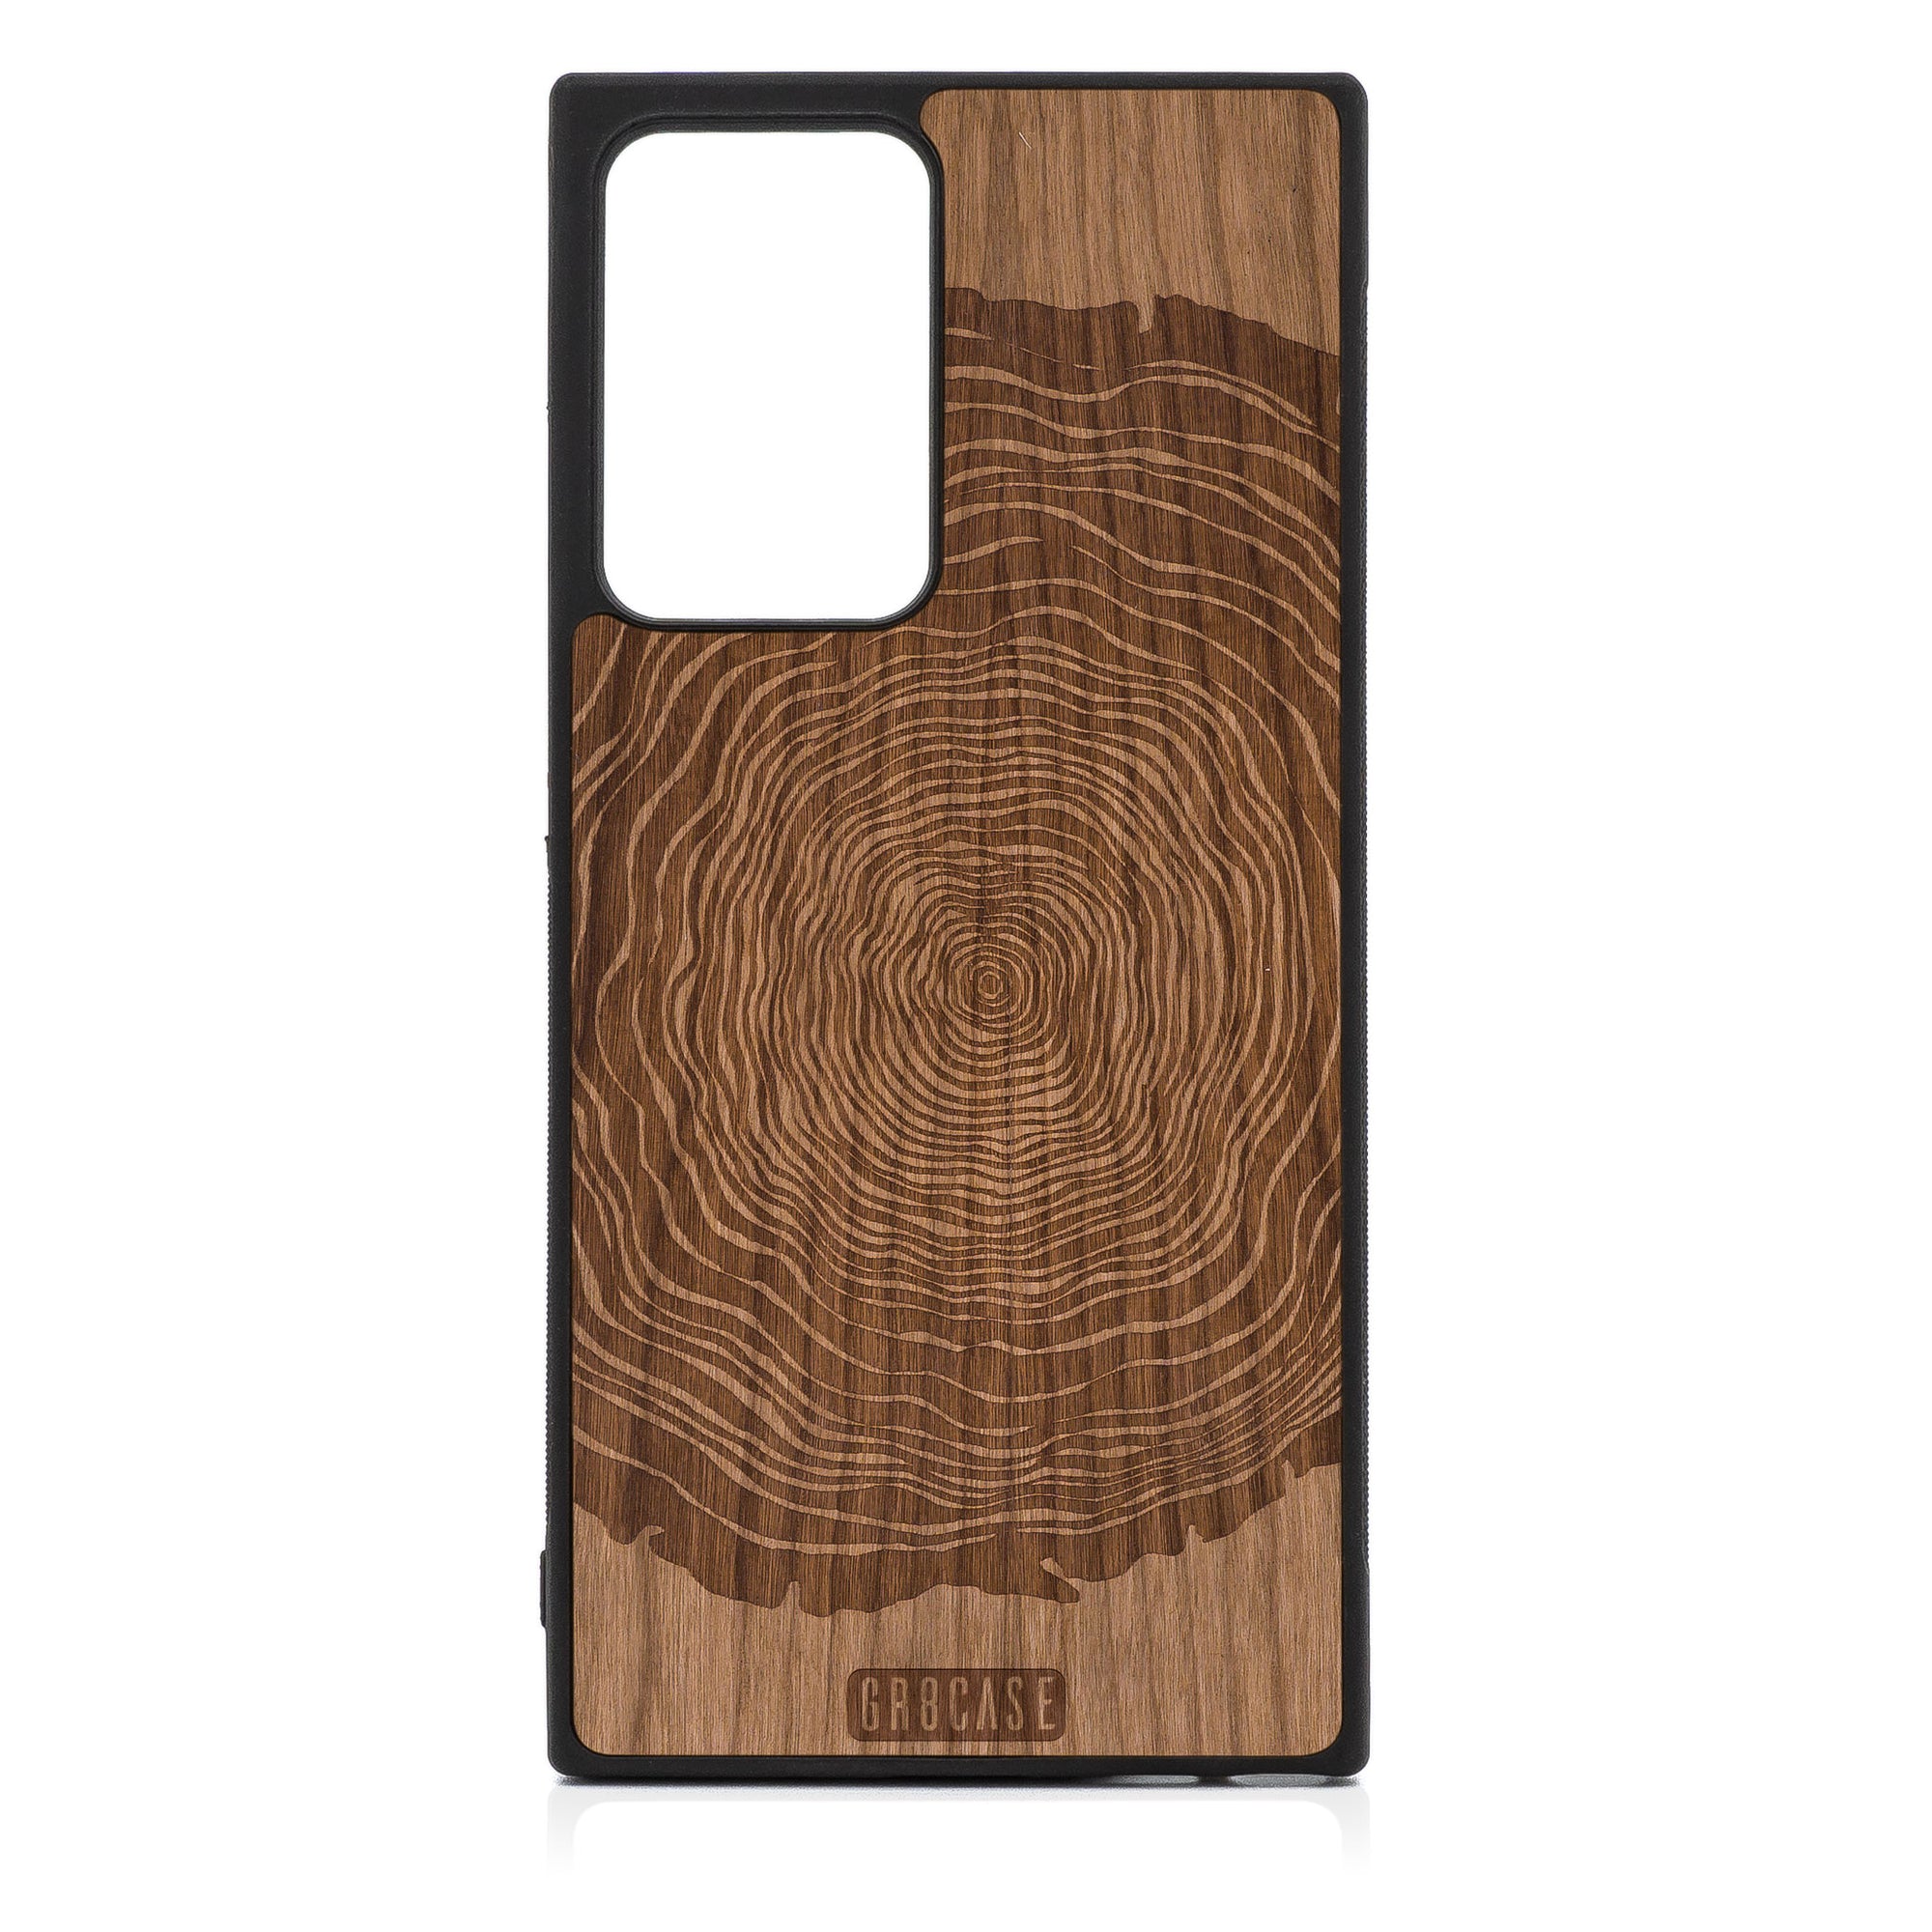 Tree Rings Design Wood Case For Samsung Galaxy Note 20 Ultra